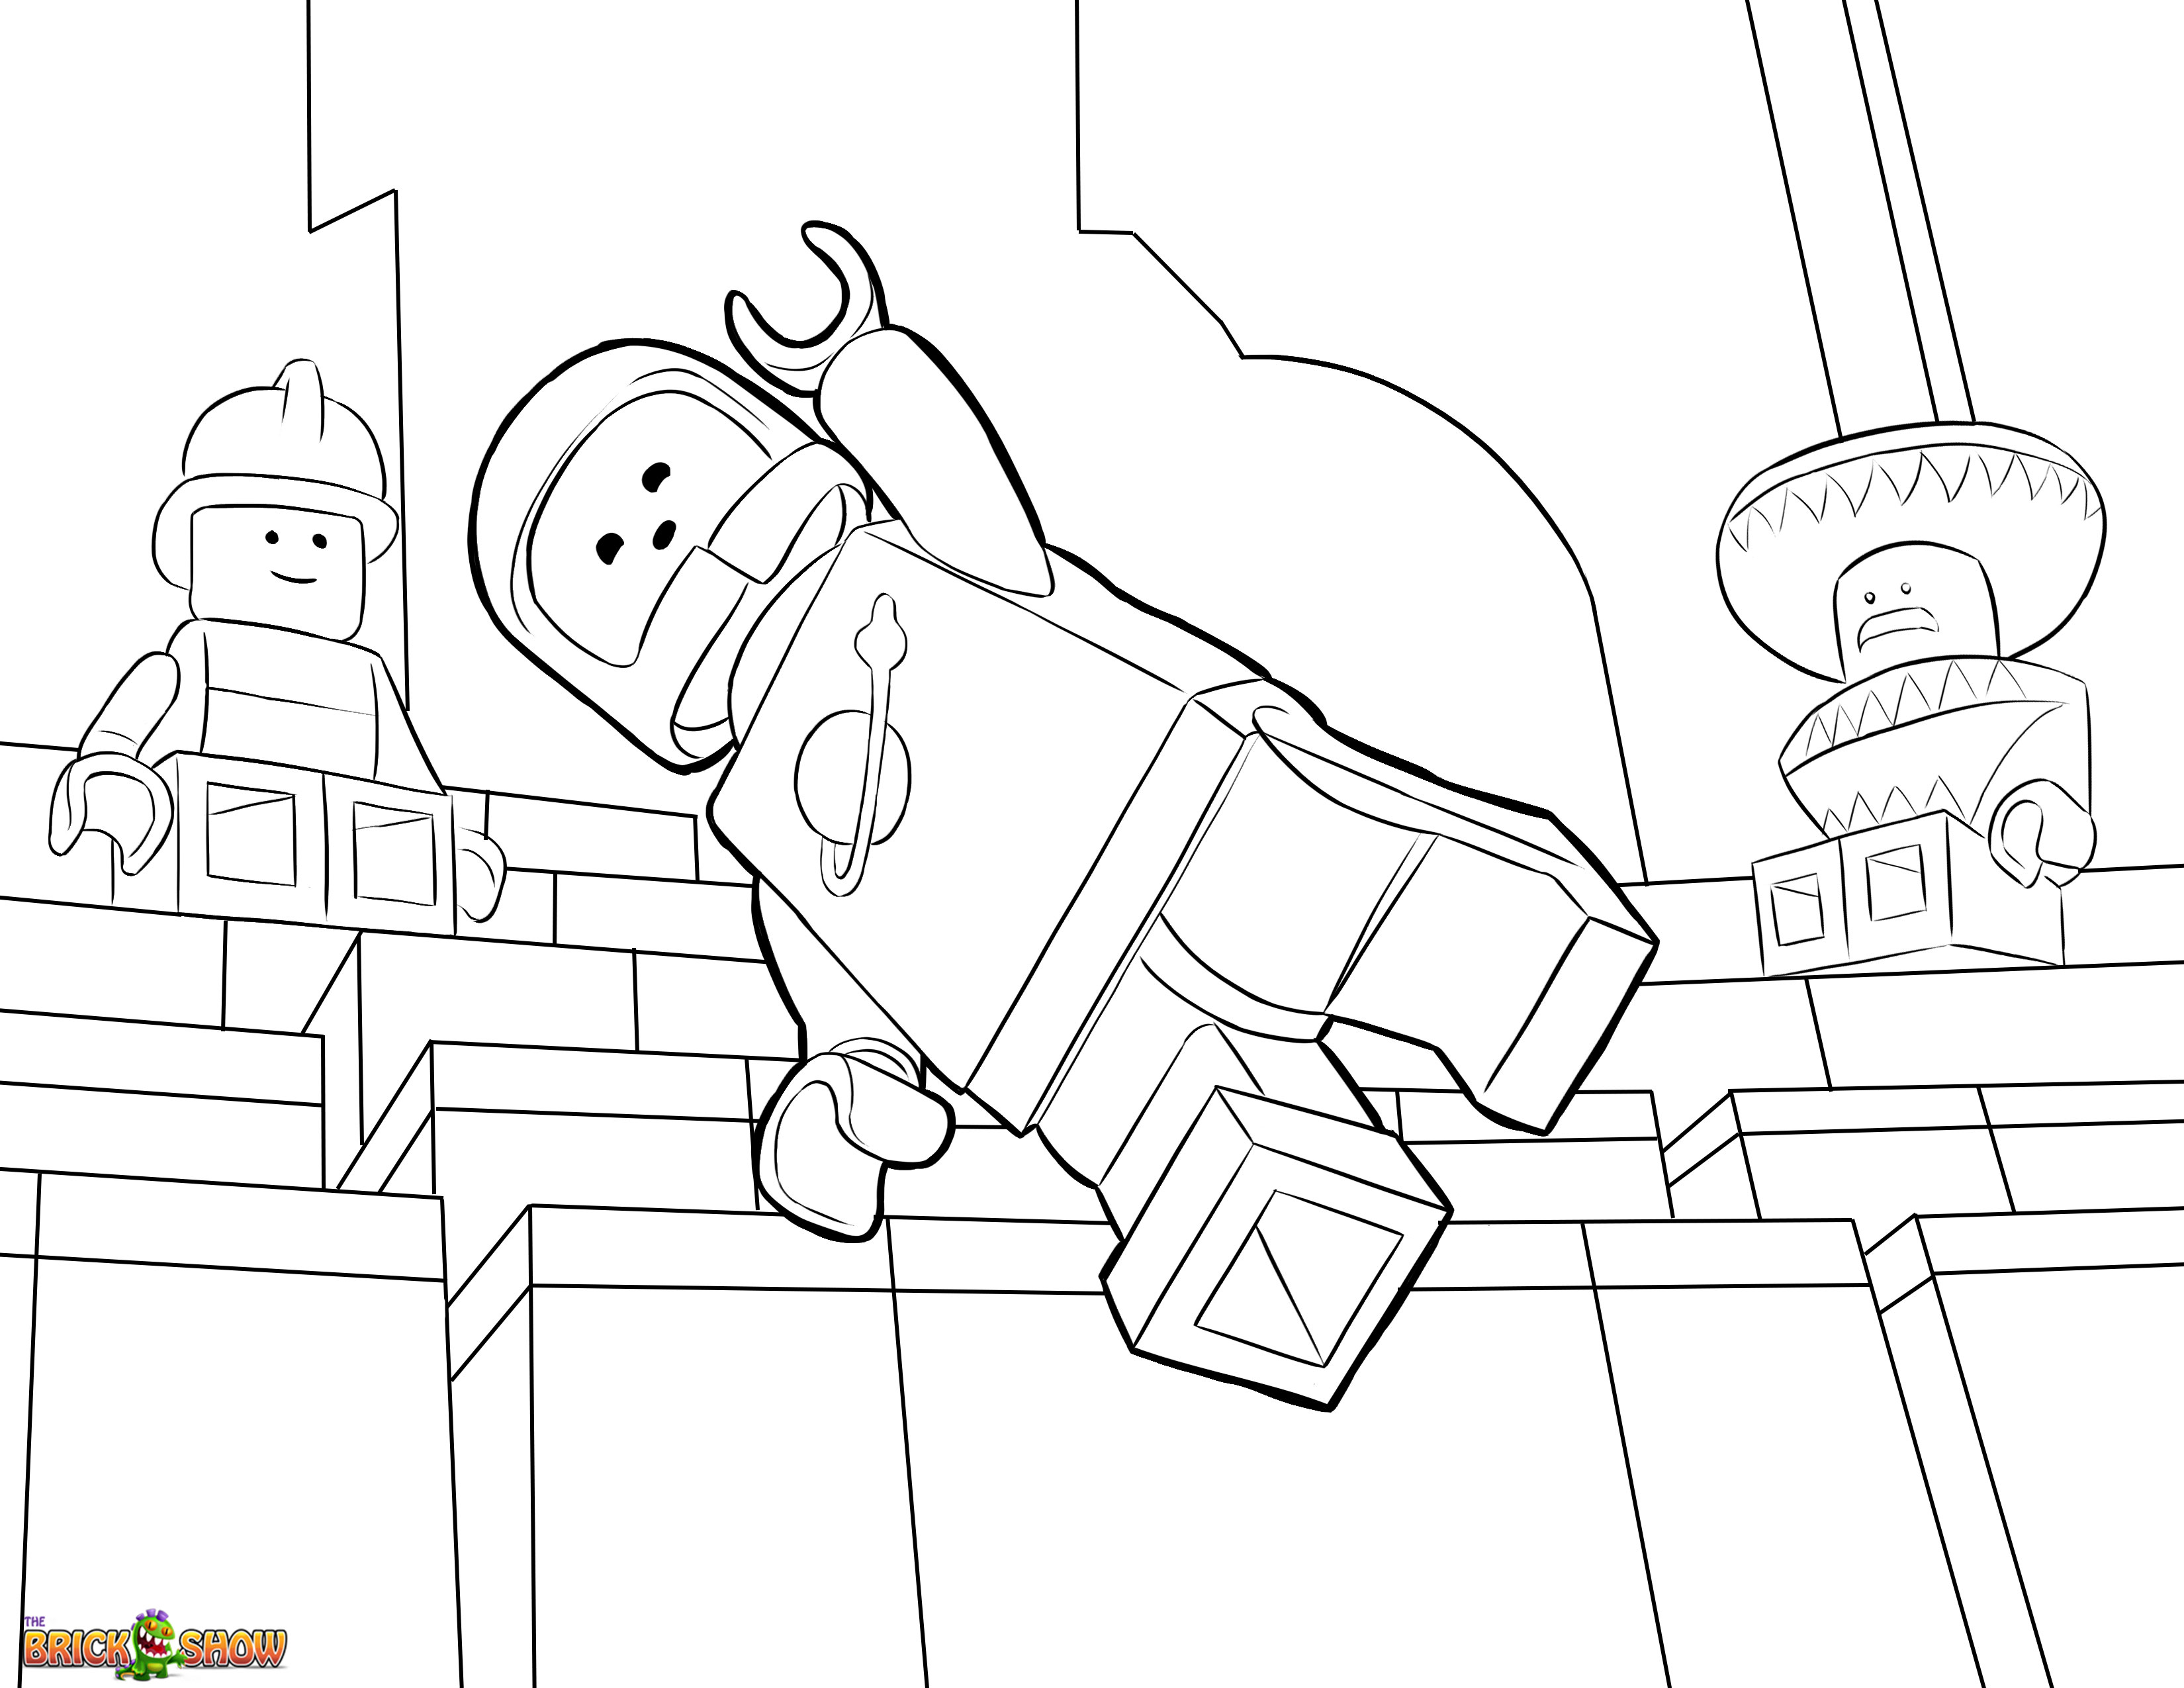 yahoo new lego coloring pages - photo #30